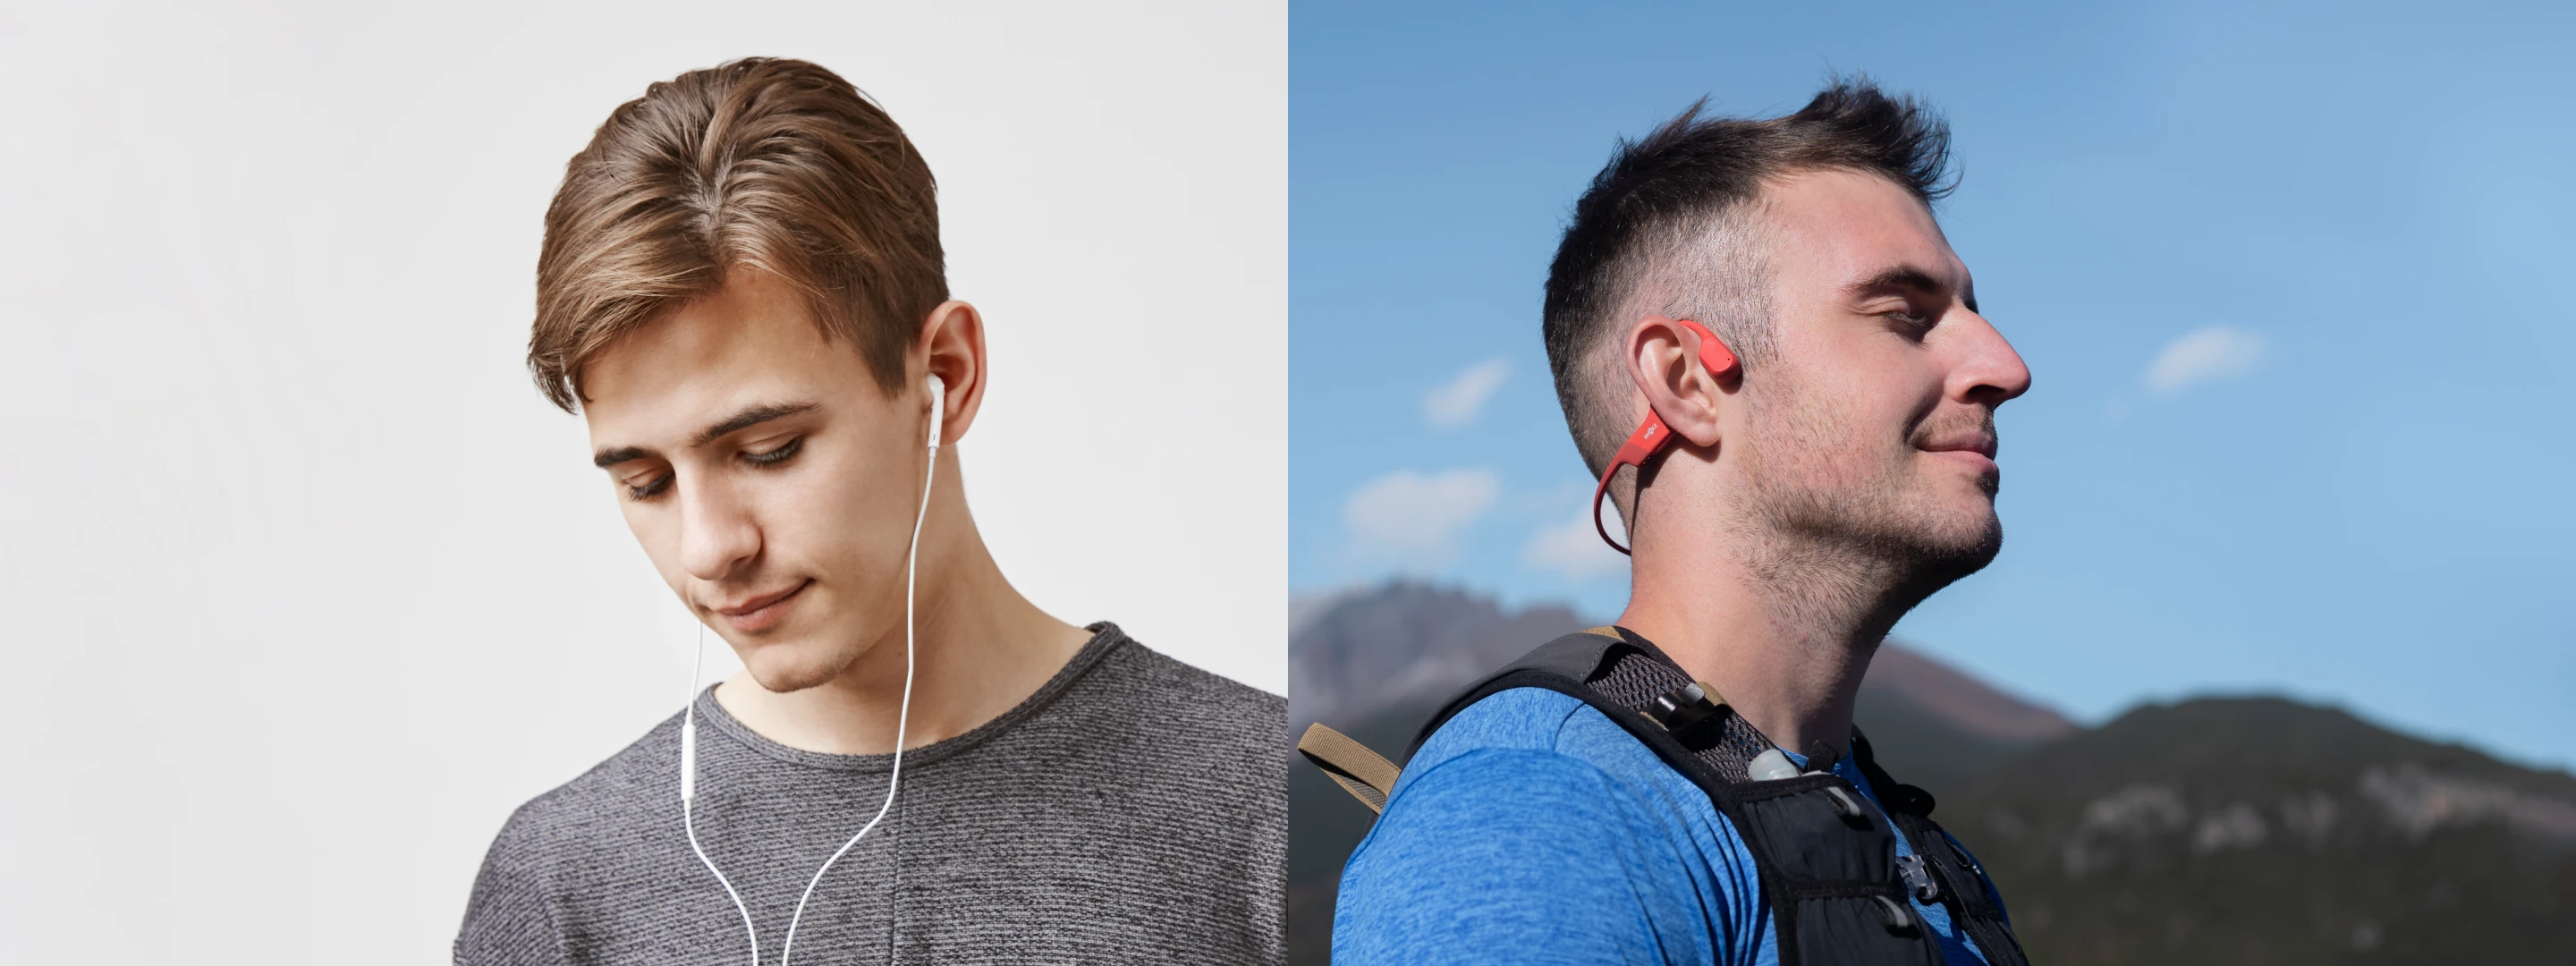 wired vs wireless headphones which one should you choose shokz united states